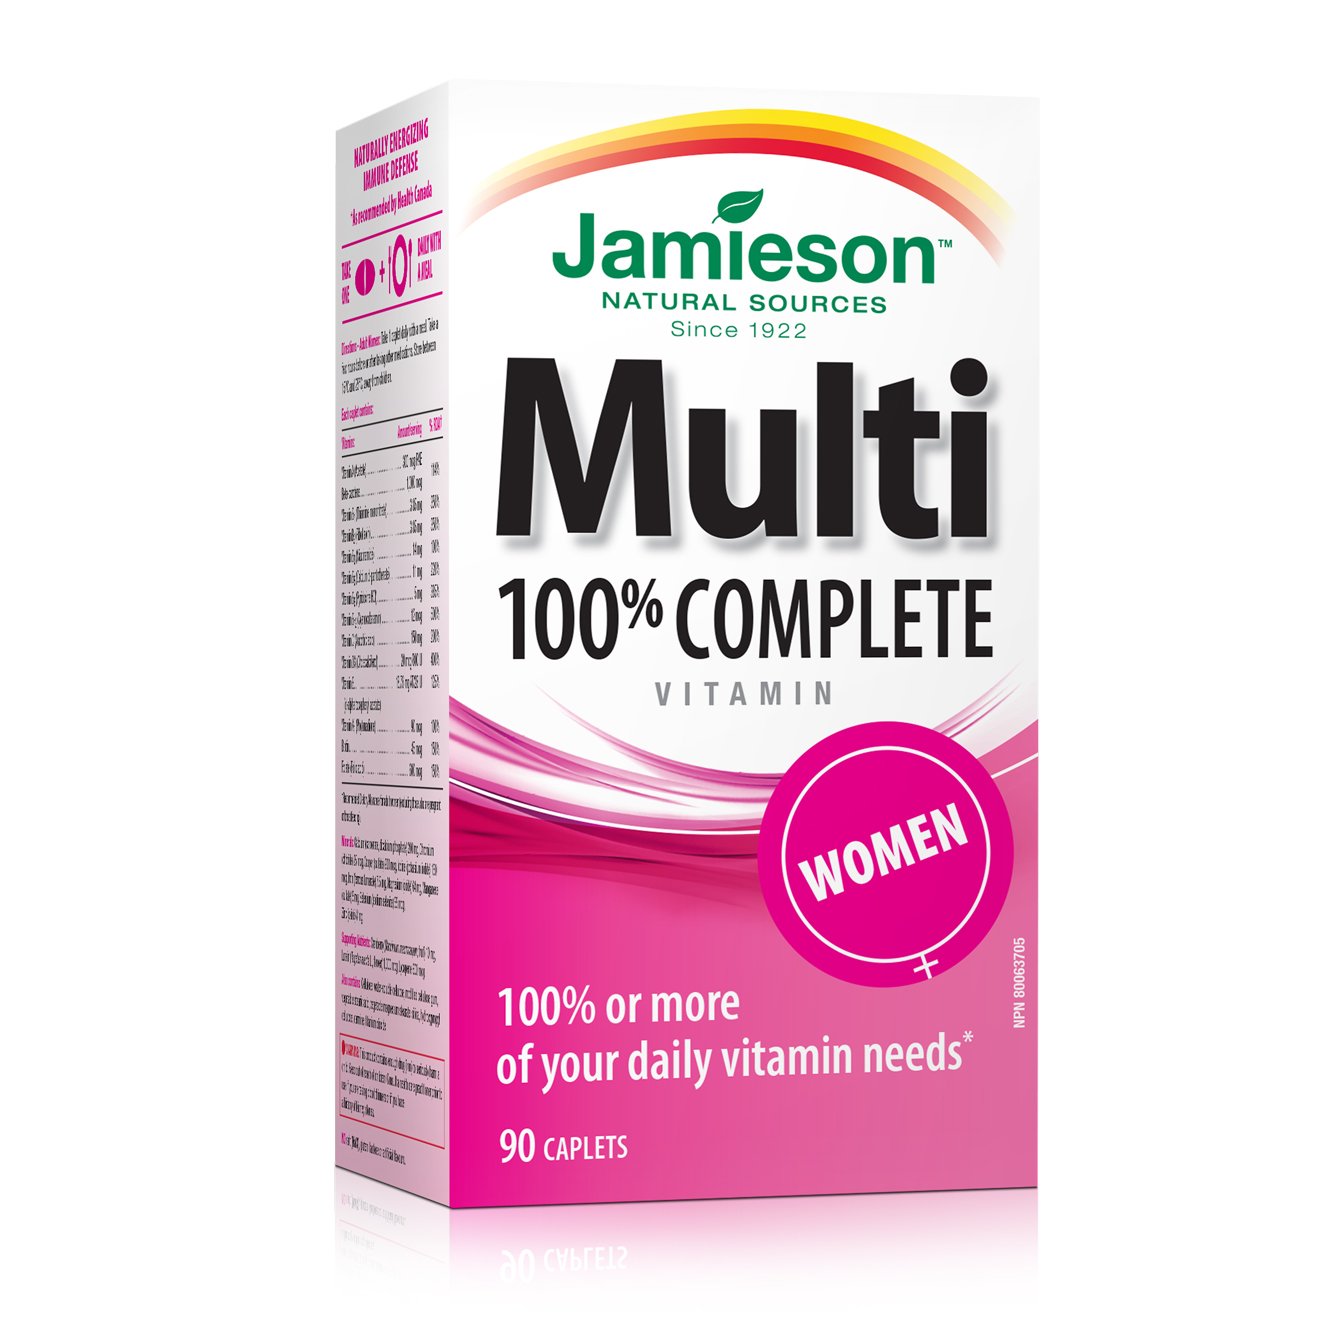 7868_100% Complete Multivitamin for Women_Pack White Background